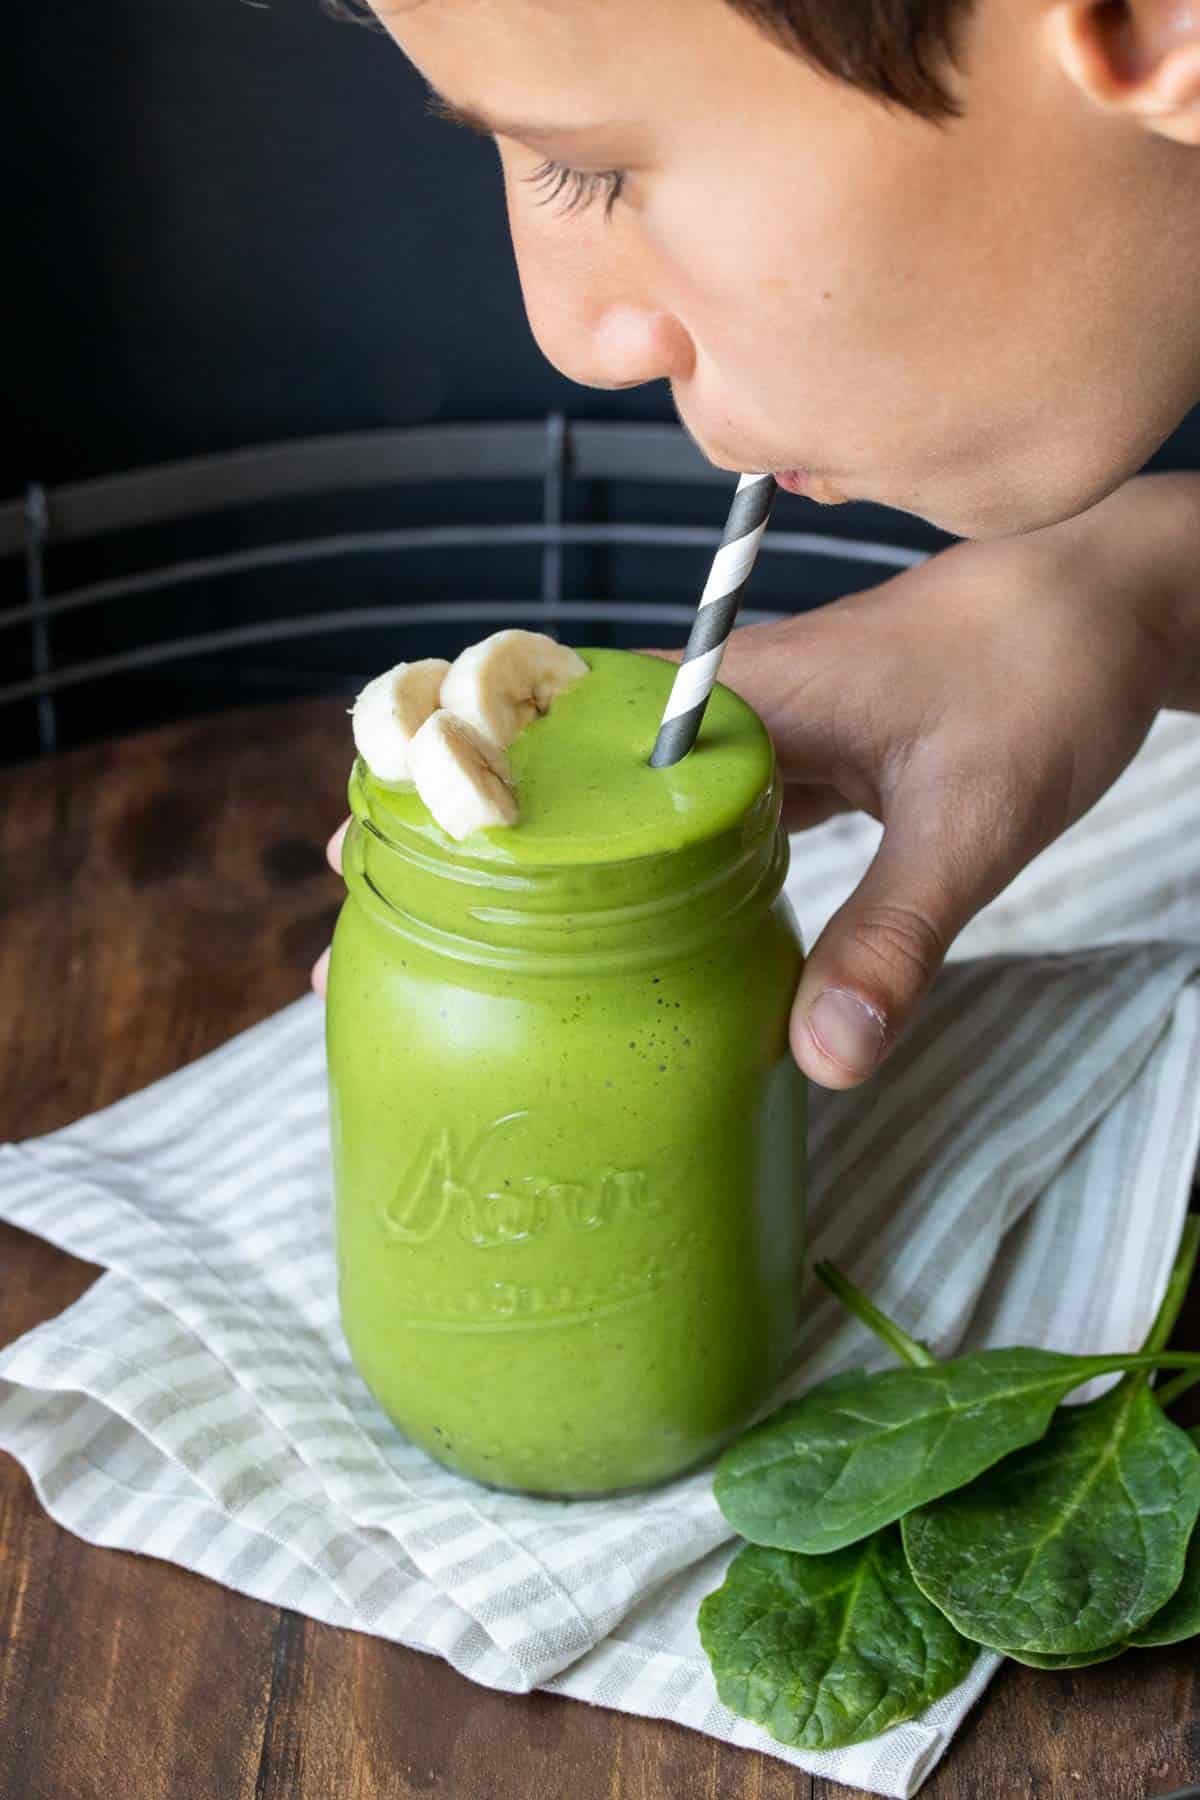 Boy holding a glass jar with a green smoothie and sipping it from a straw